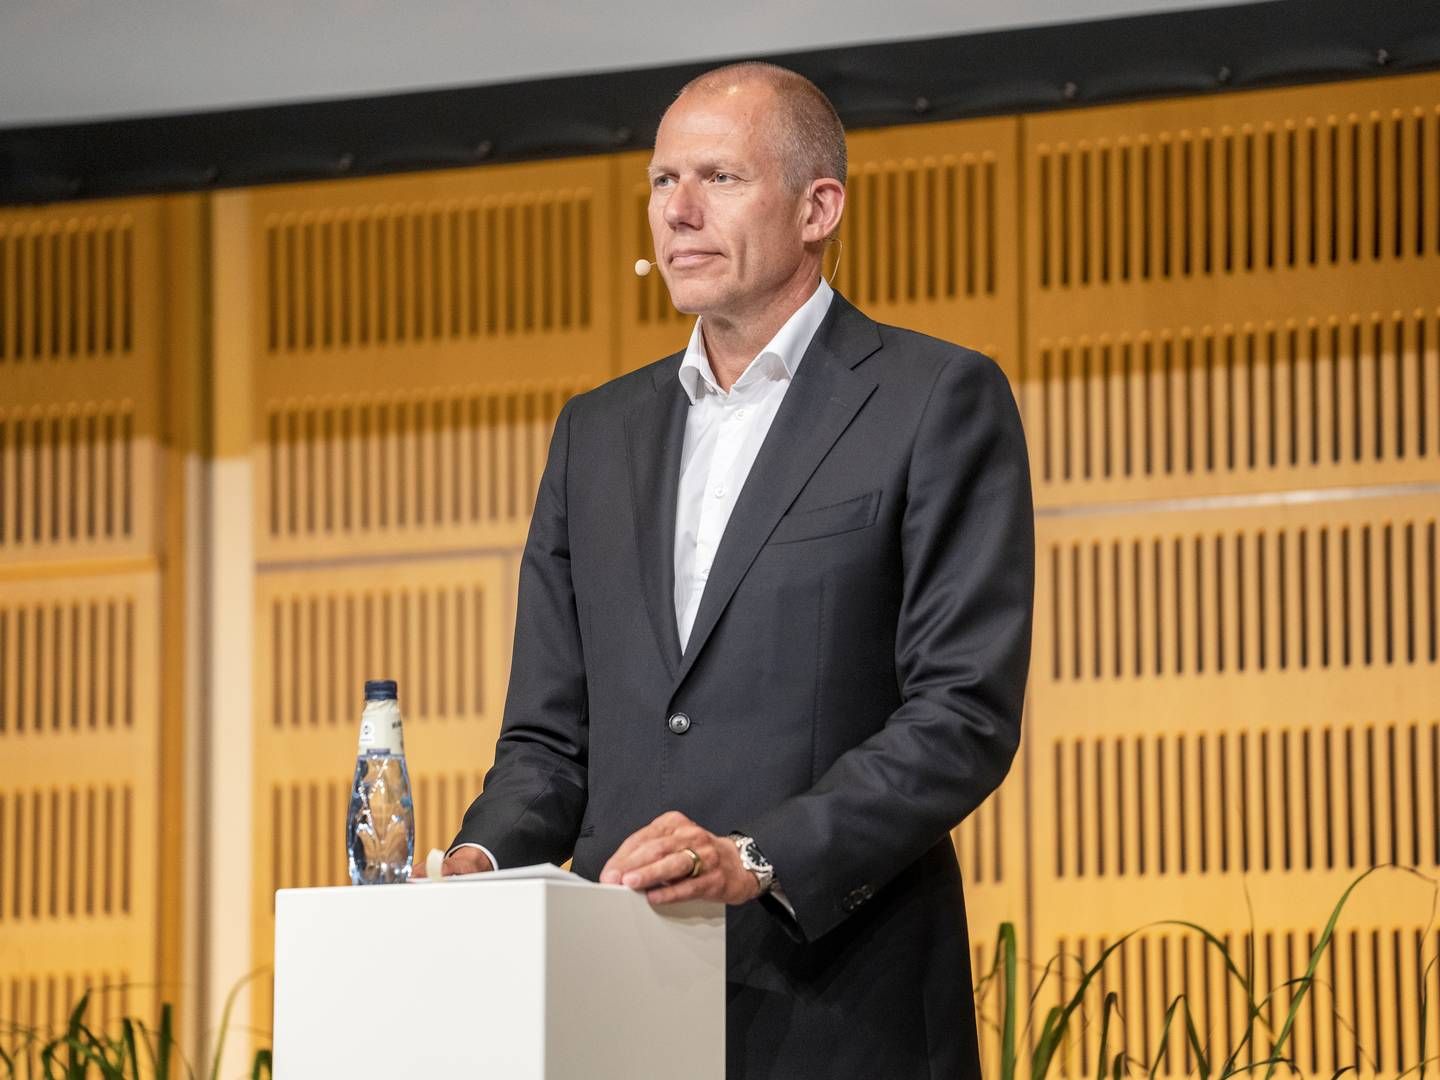 DSV's outgoing CEO Jens Bjørn Andersen tells Danish business media Finans that he regrets that he has not managed to get more women and foreigners into the top management of DSV.